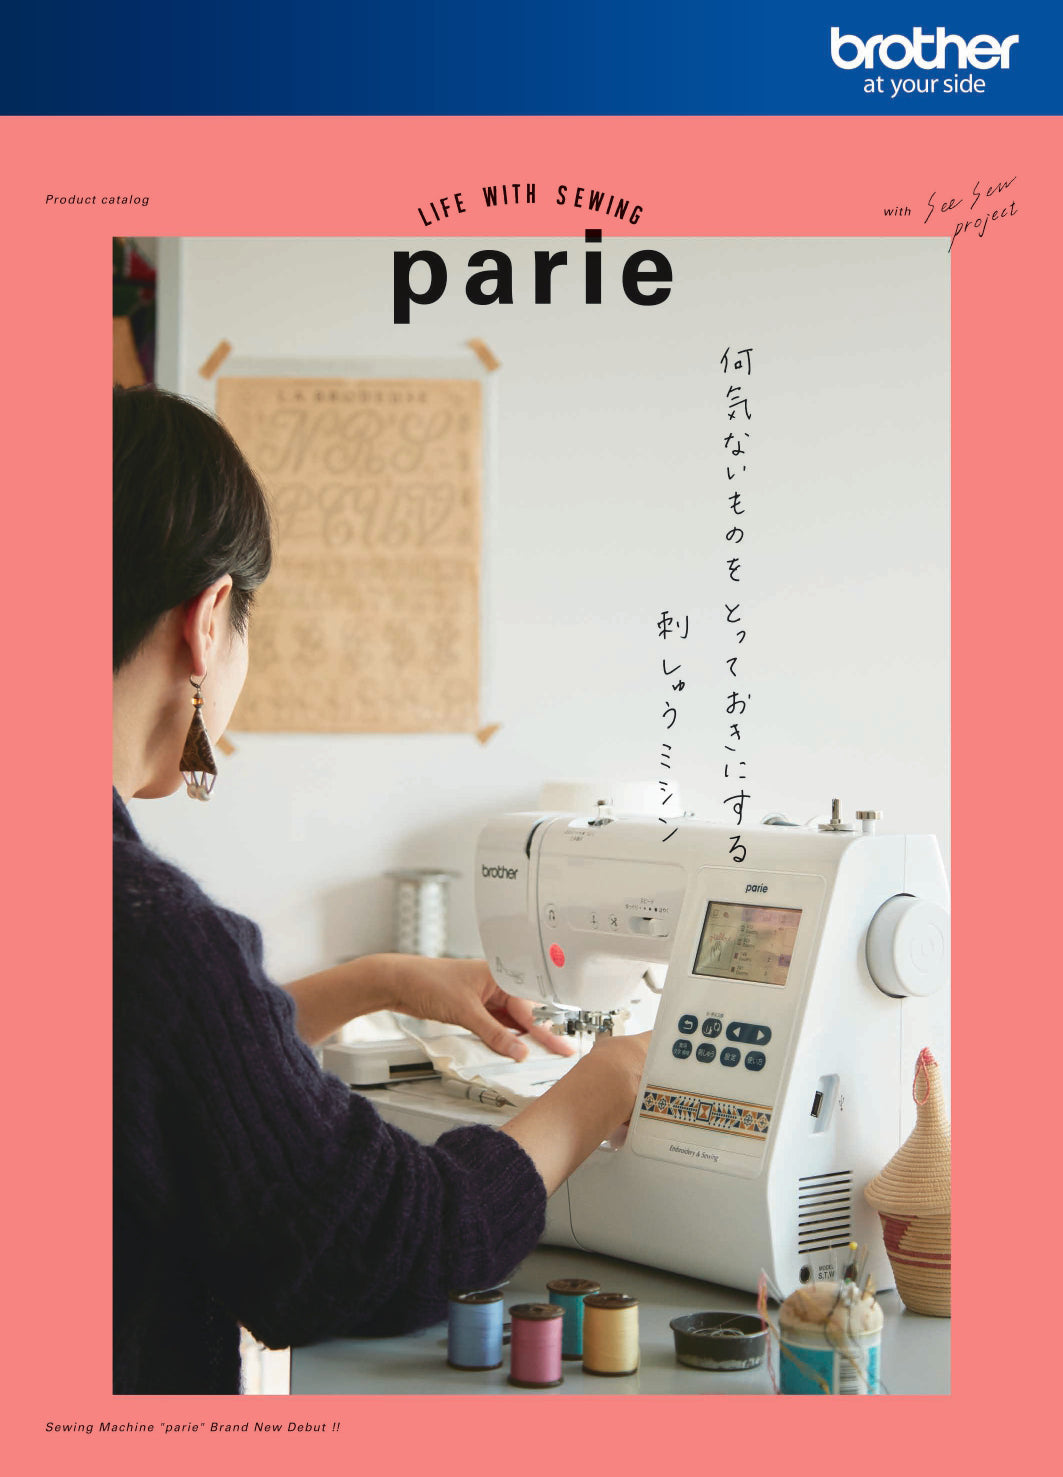 brotherコンピューターミシン Parie